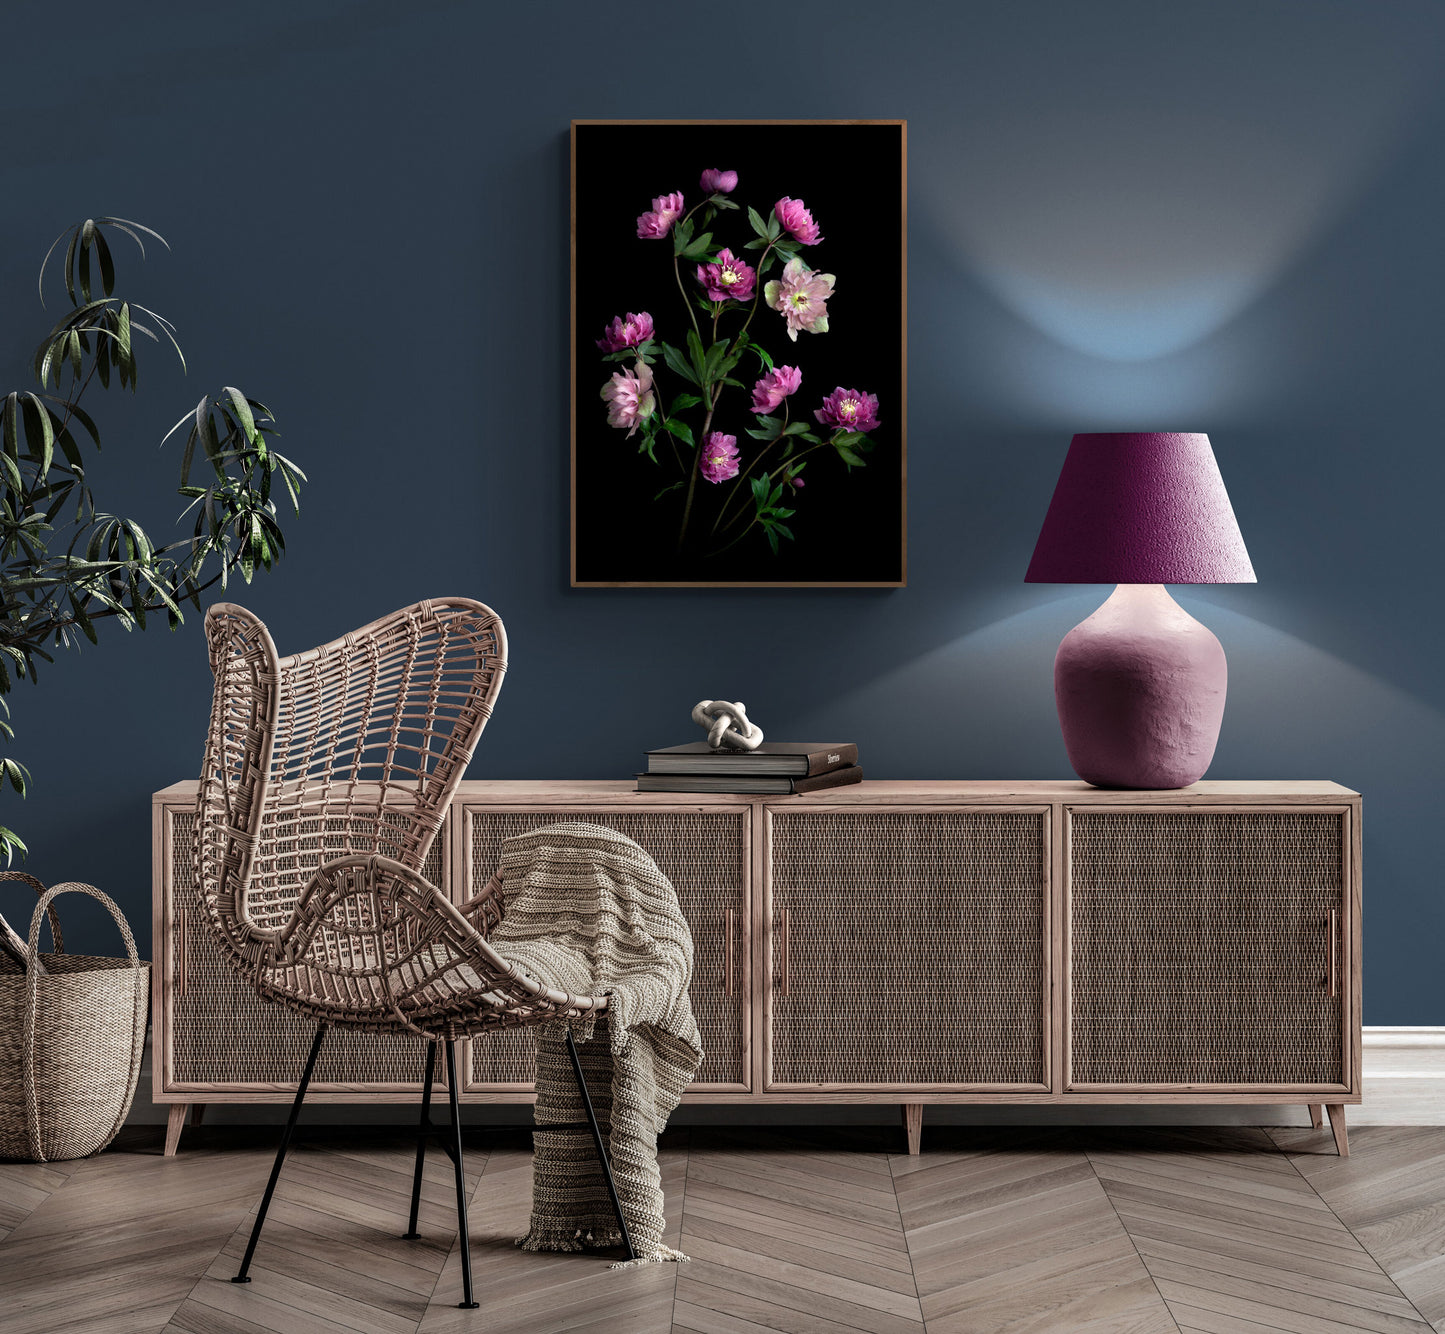  Framed dark botanical print of pink and mauve double Hellebores photographed on a black background hanging on a teal coloured wall